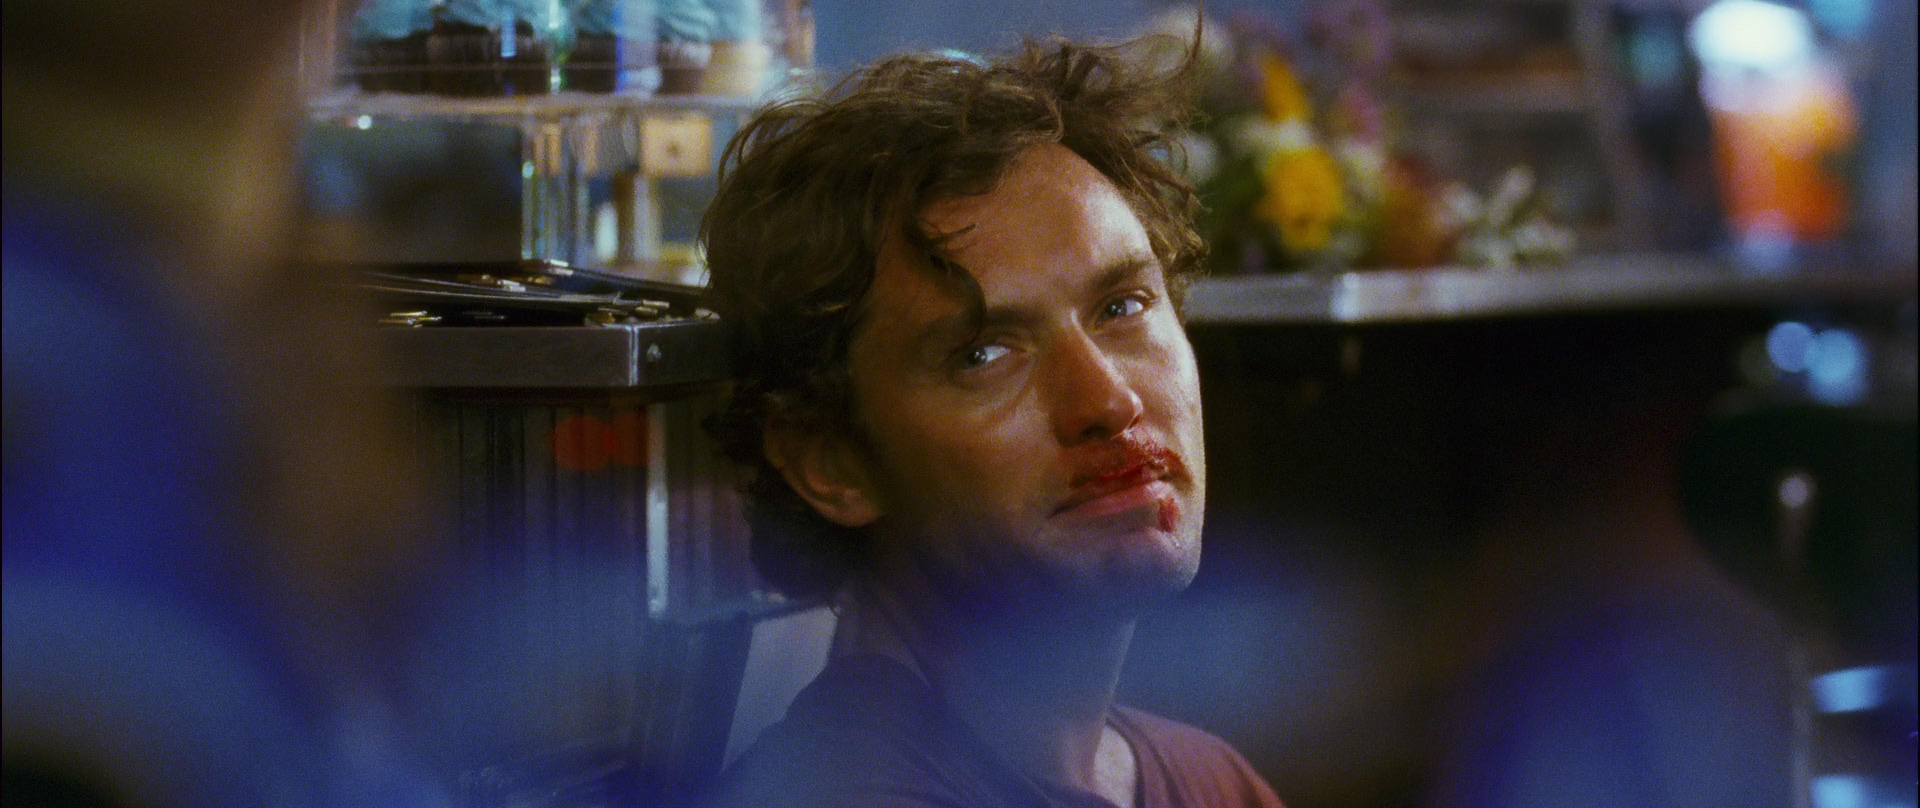 Jude Law in My Blueberry Nights